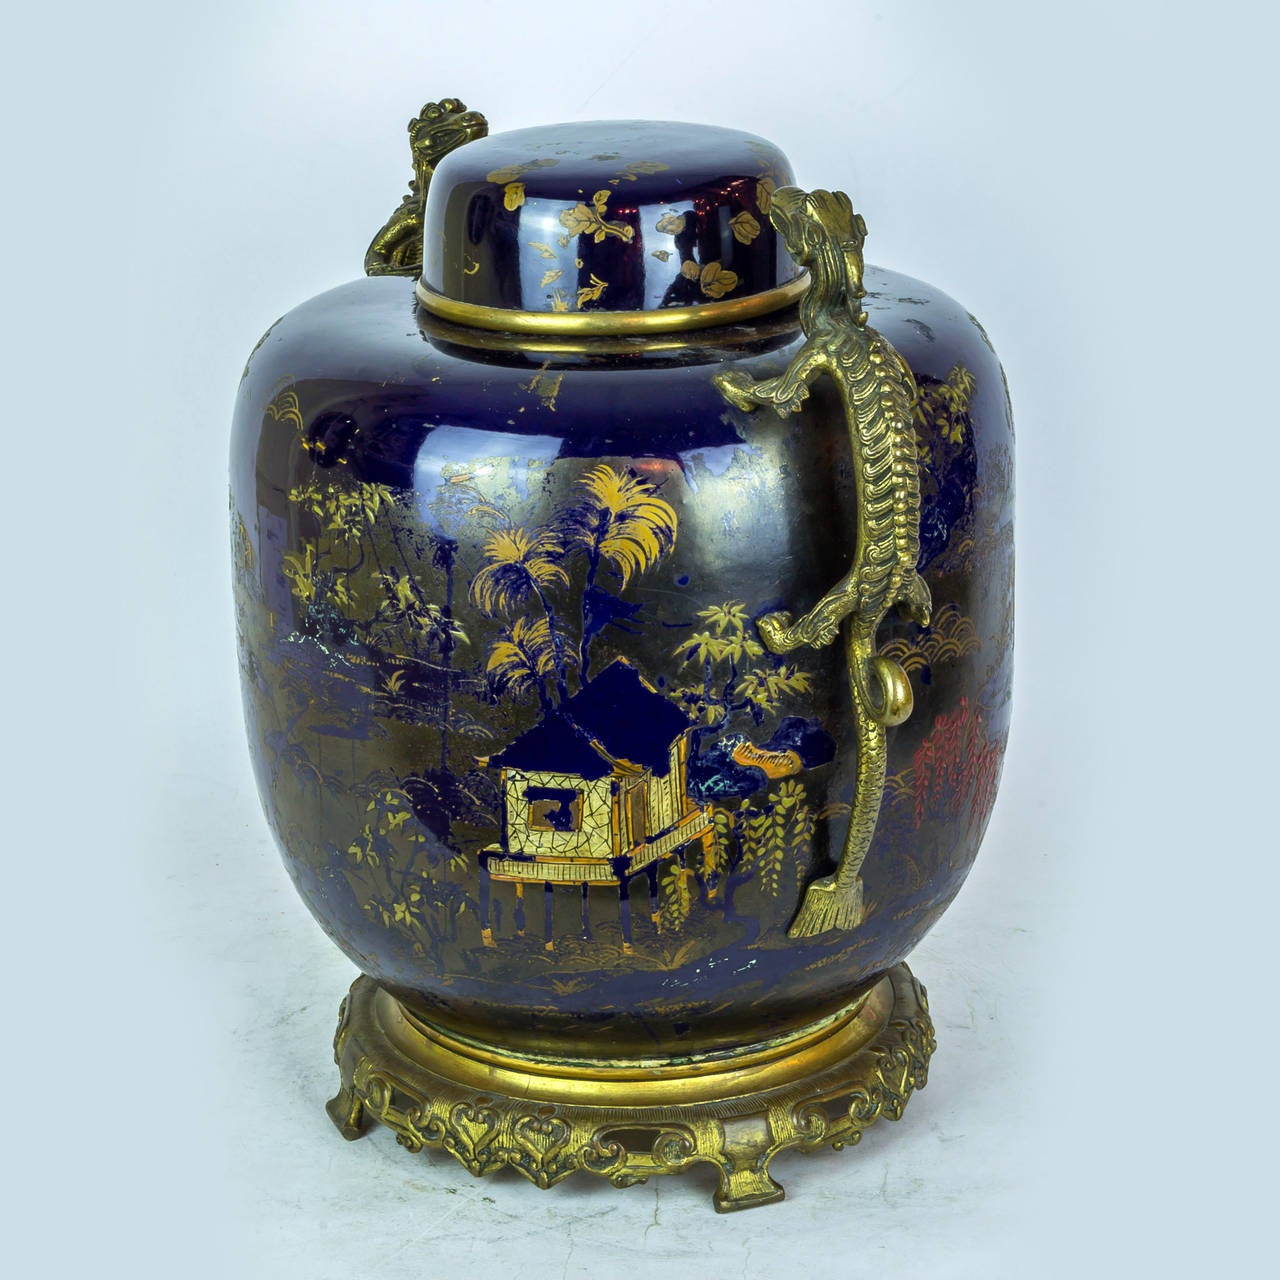 19th Century Oriental Porcelain Covered Jar with French Bronze Mounted Dragon Handles